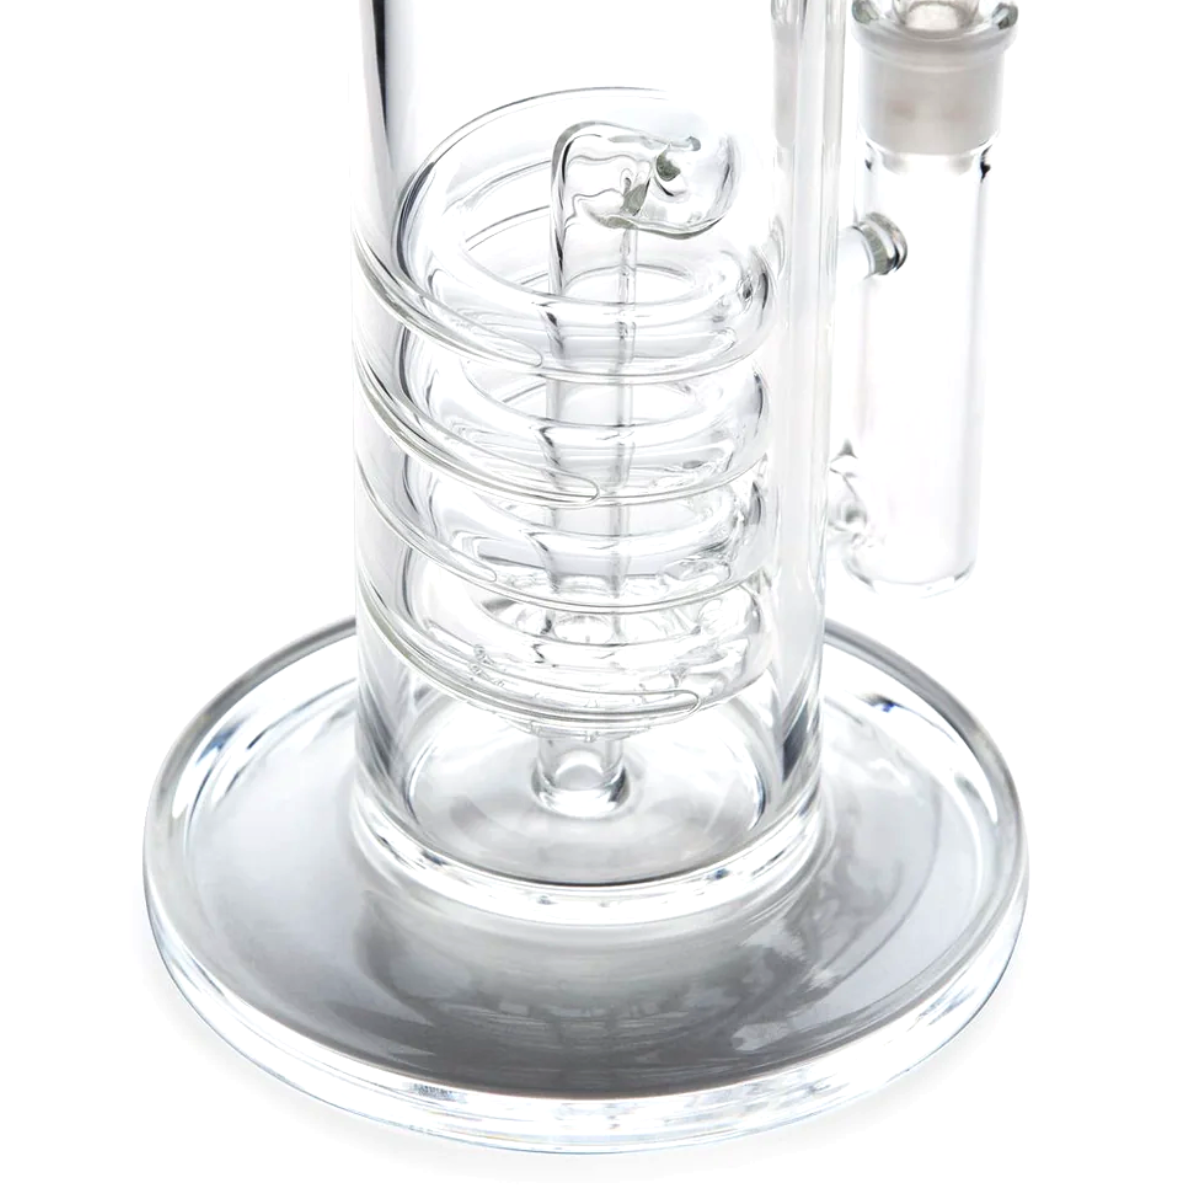 13" Coil Showerhead Water Pipe